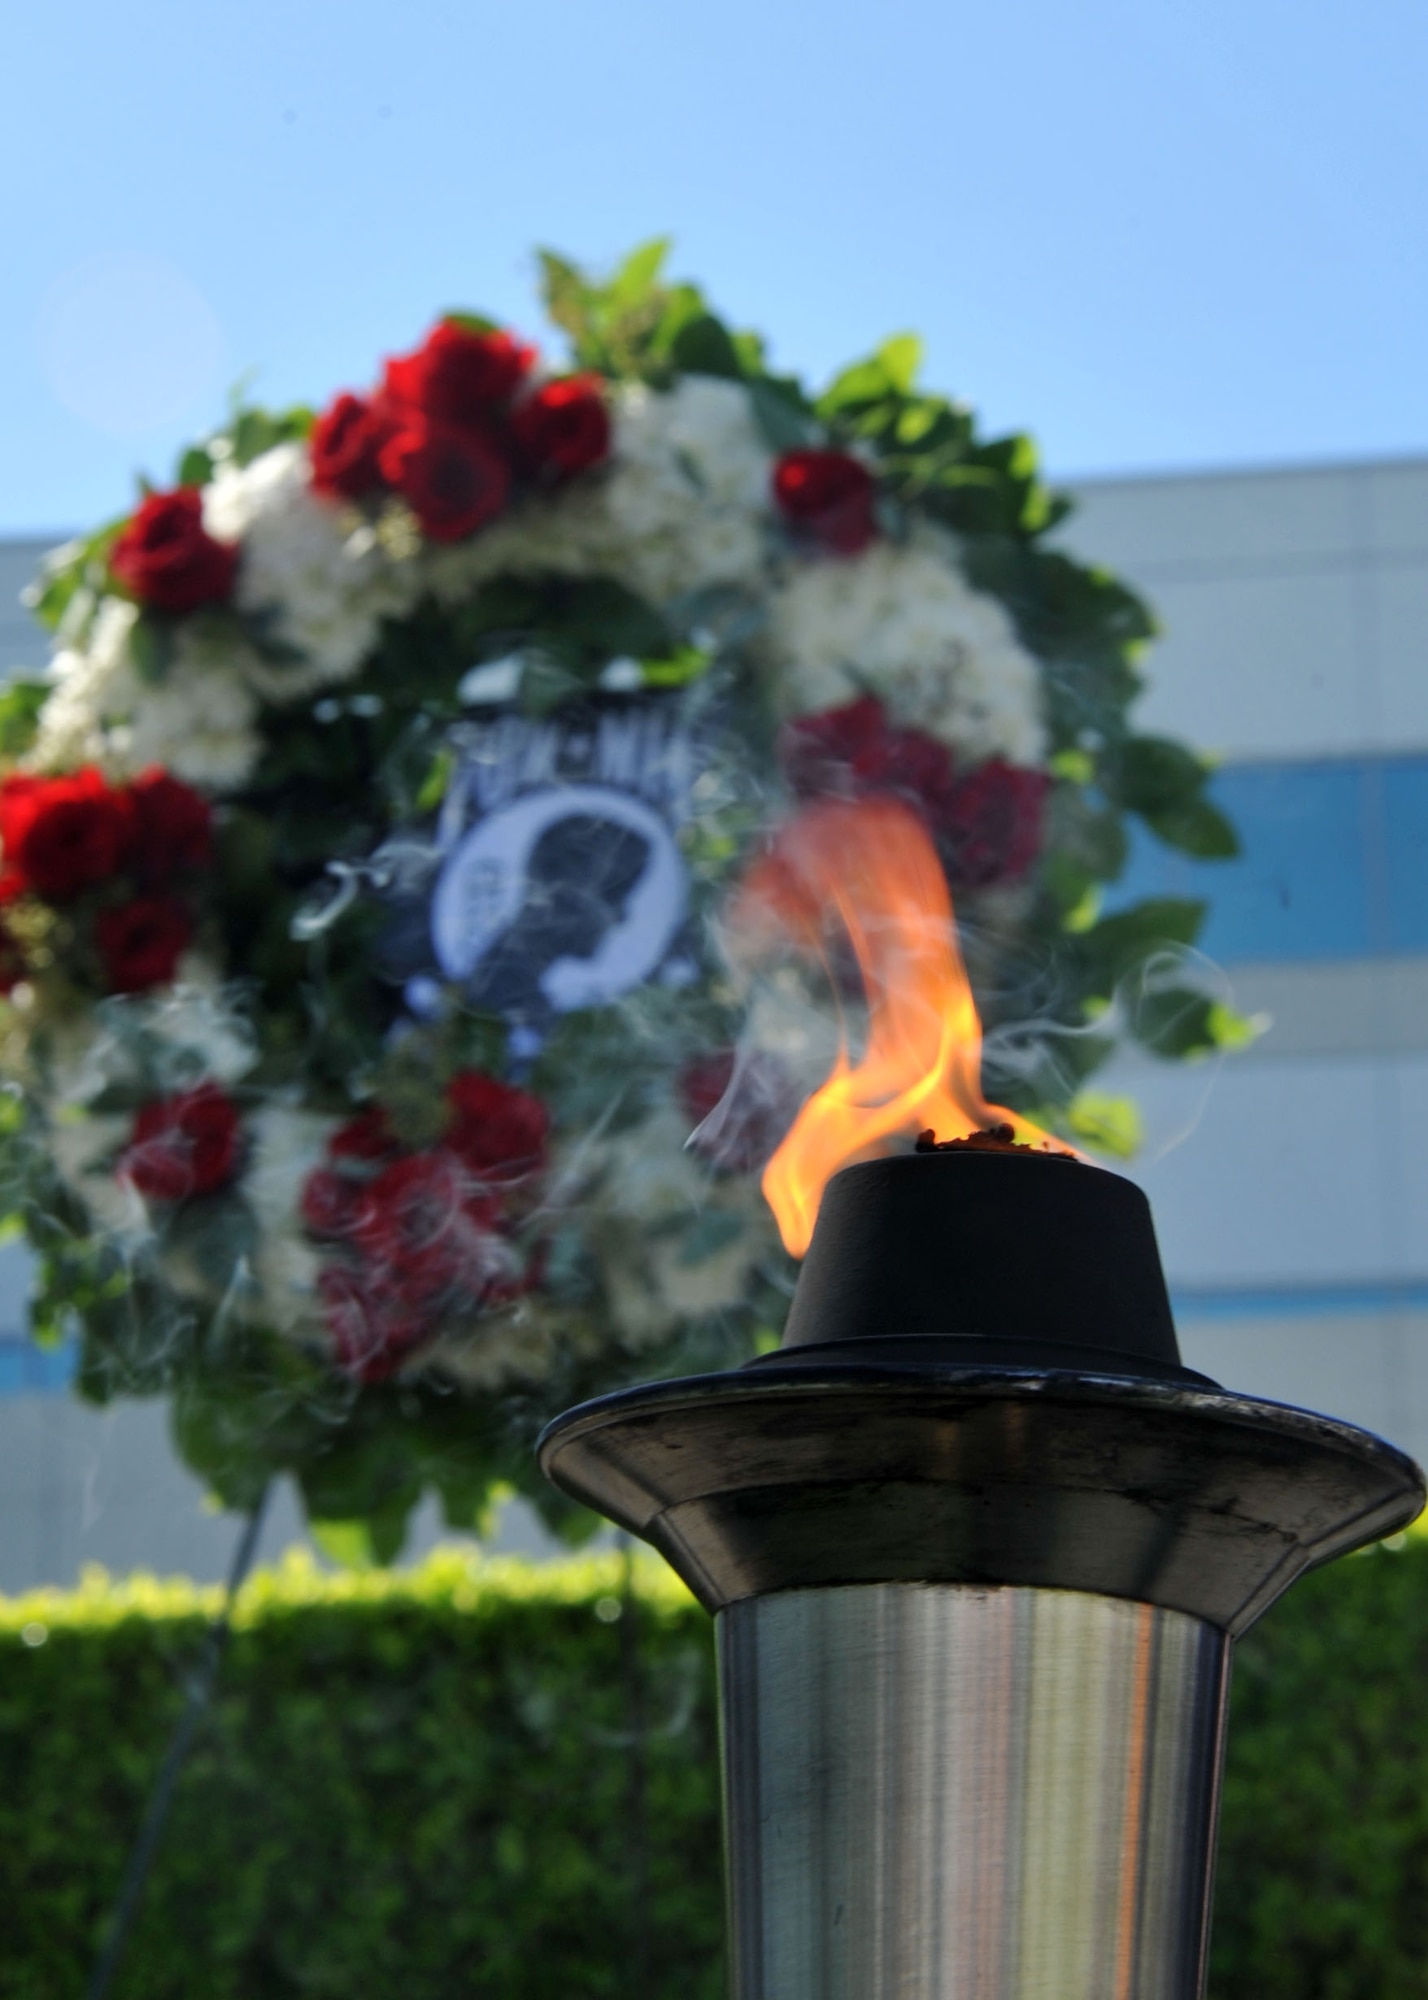 The POW/MIA wreath and torch lie in repose on the stage during the National POW/MIA Recognition Day ceremony Sept. 18 at the Space and Missile Systems Center's Schriever Space Complex at Los Angeles Air Force Base in El Segundo, Calif. (U.S. Air Force photo/Sarah Corrice)